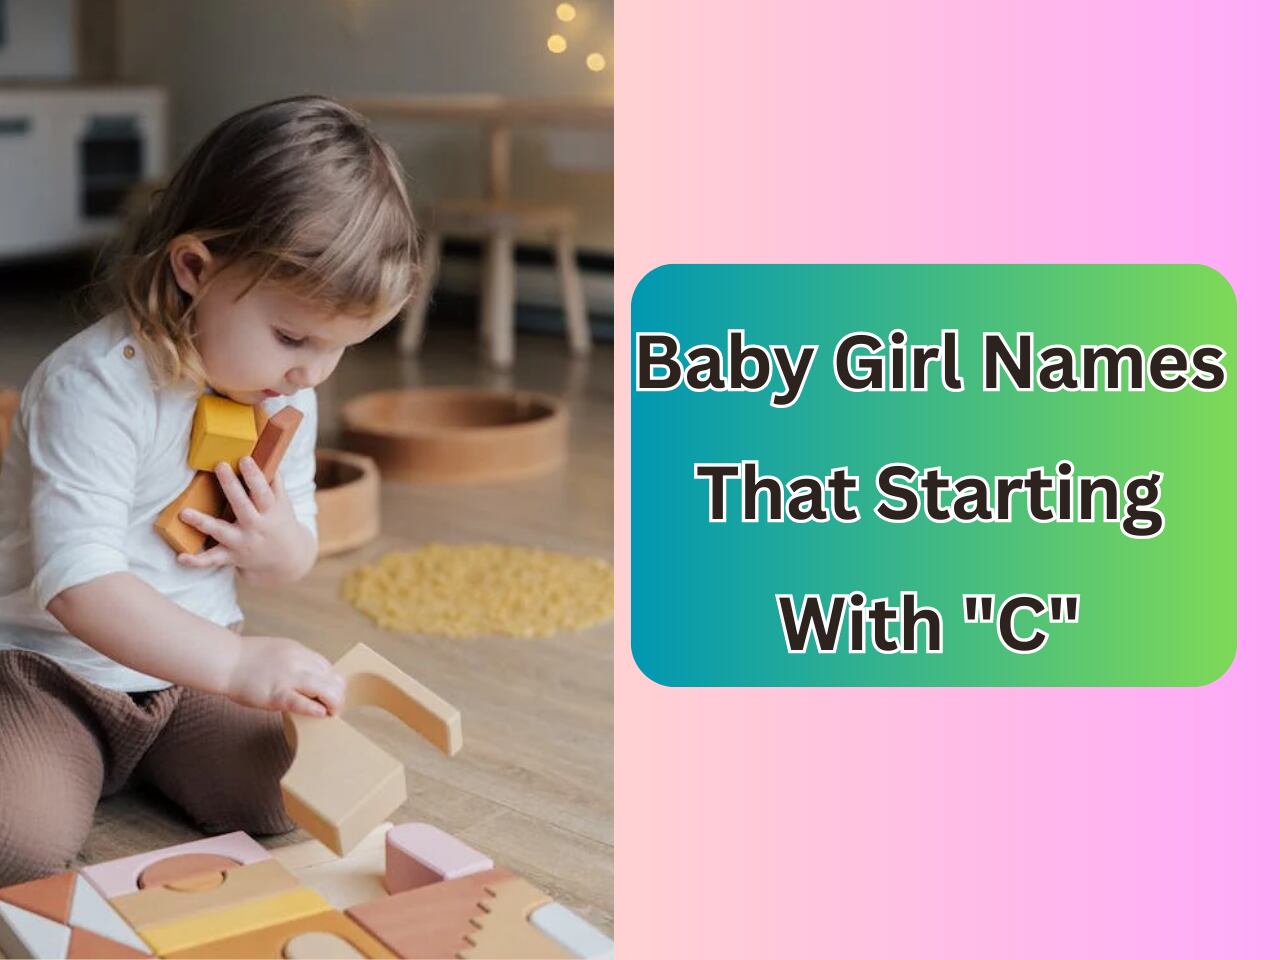 Baby Girl Names That Starting With C